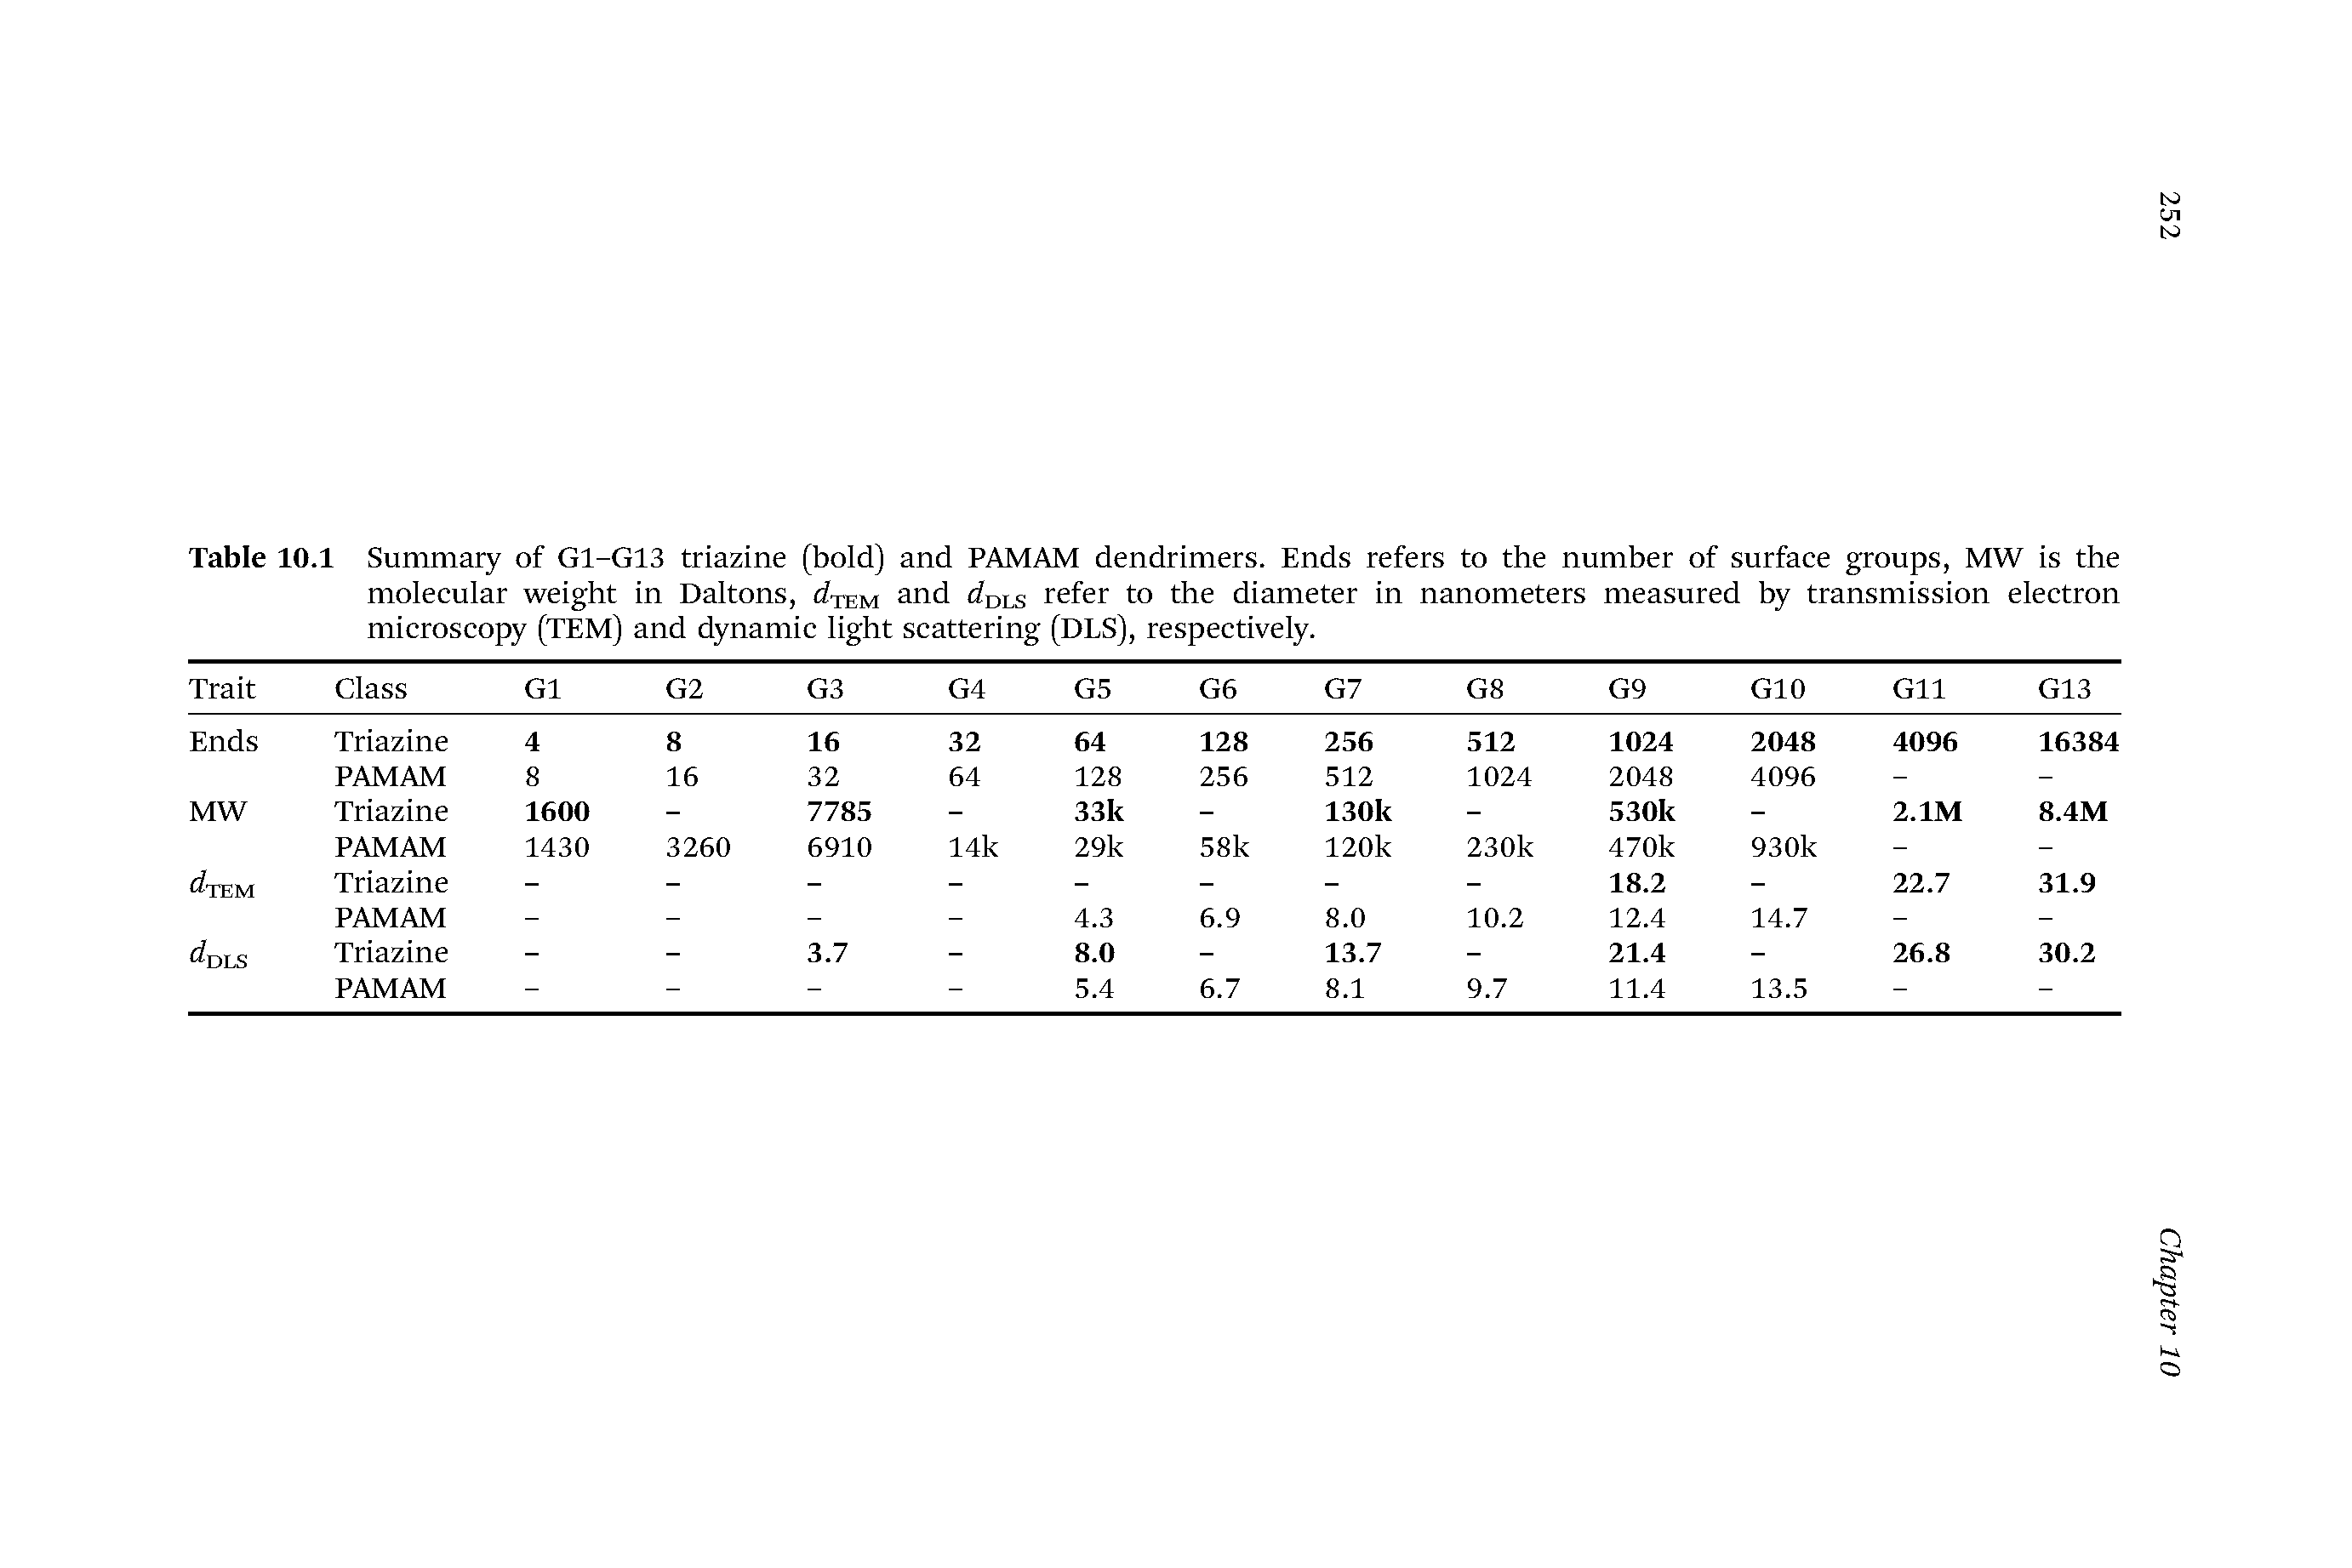 Table 10.1 Summary of G1-G13 triazine (bold) and PAMAM dendrimers. Ends refers to the number of surface groups, MW is the molecular weight in Daltons, (ixEM and (iors refer to the diameter in nanometers measured by transmission electron microscopy (TEM) and dynamic light scattering (DLS), respectively.